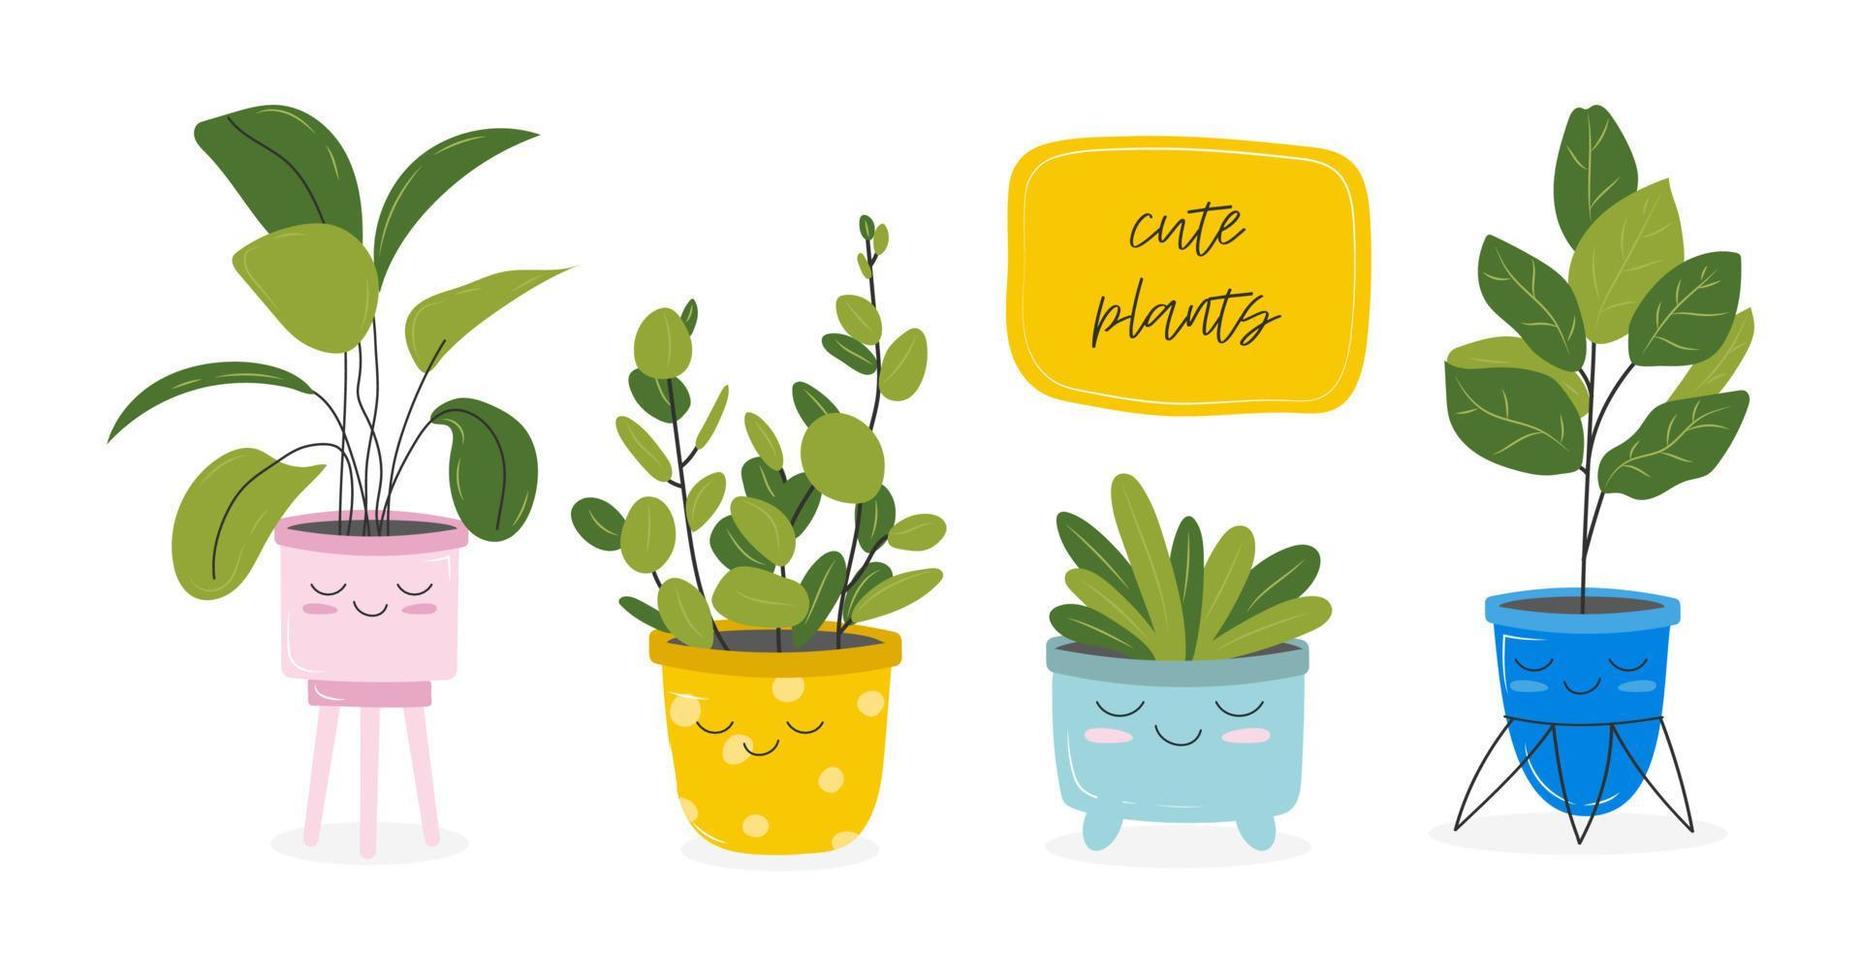 Postcards with a picture of a houseplant in a pot with a slogan about a friend. Cute kawaii houseplants with lattering, plants are friends. Vector illustration isolated on white background.